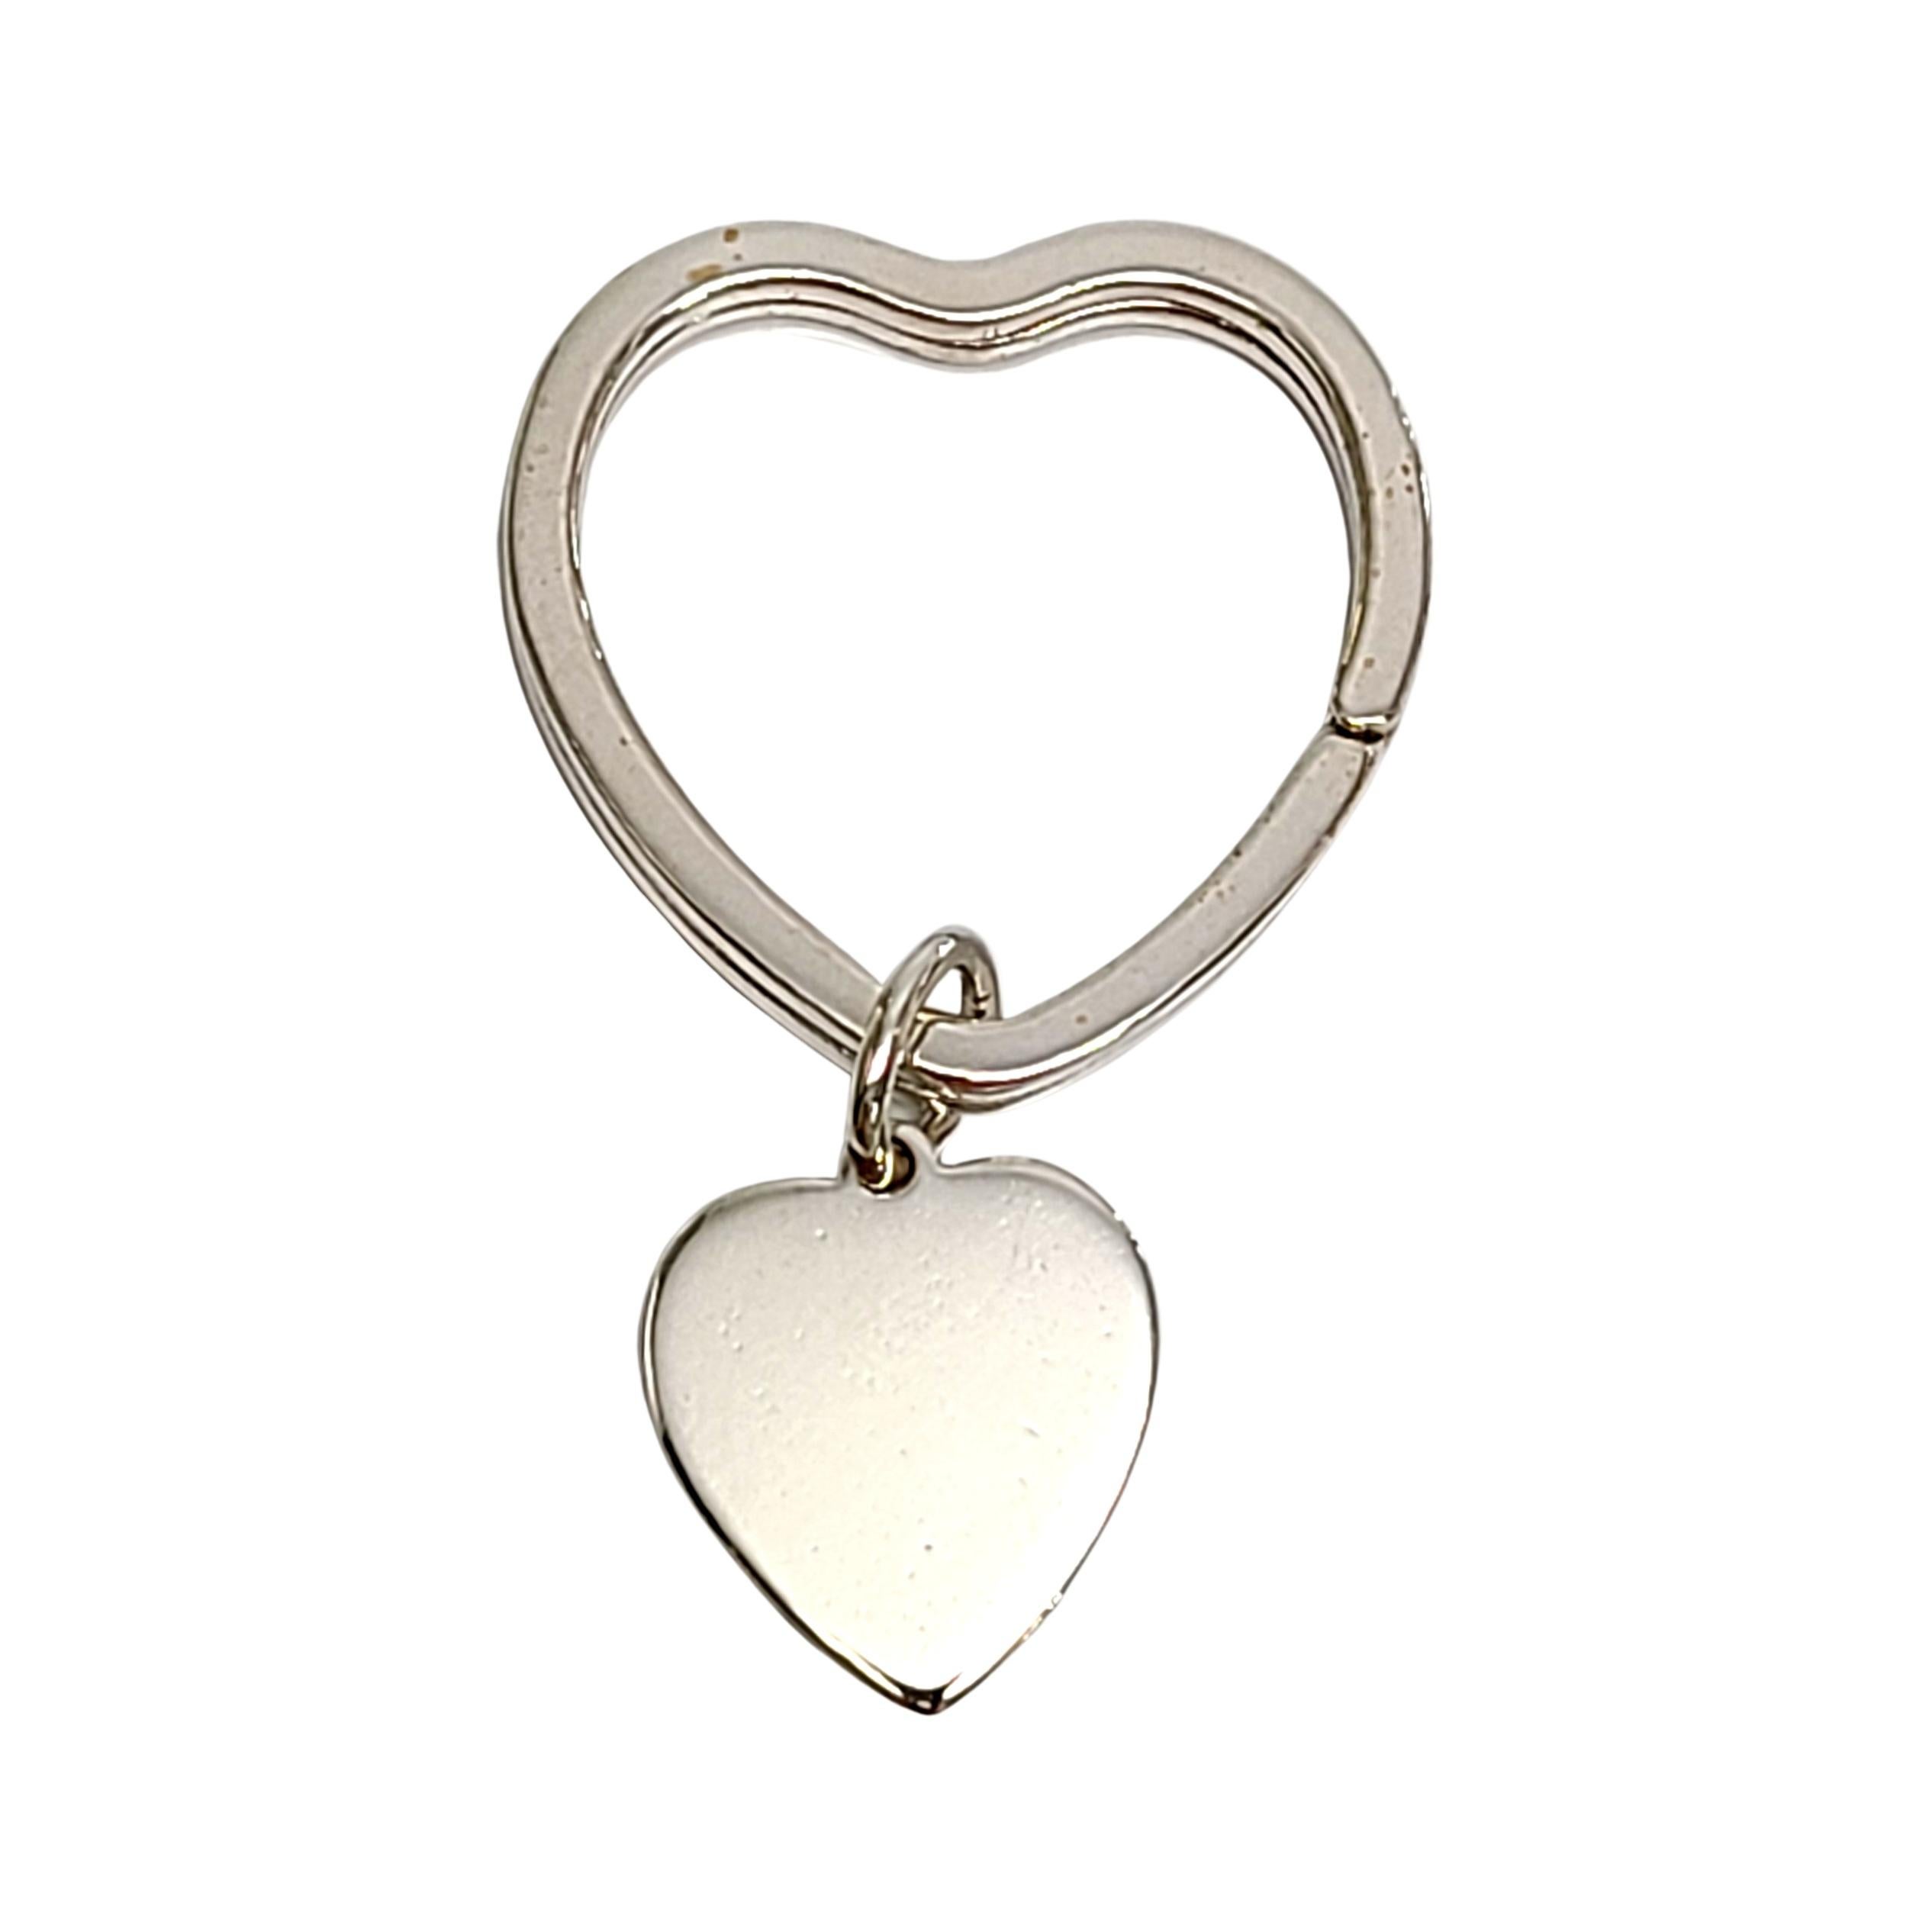 Tiffany & Co sterling silver heart key ring with heart tag.

Authentic Tiffany sterling silver key ring in a heart shape featuring a heart shaped dangling tag. Tiffany pouch and box not included.

Measures approx 2 1/4